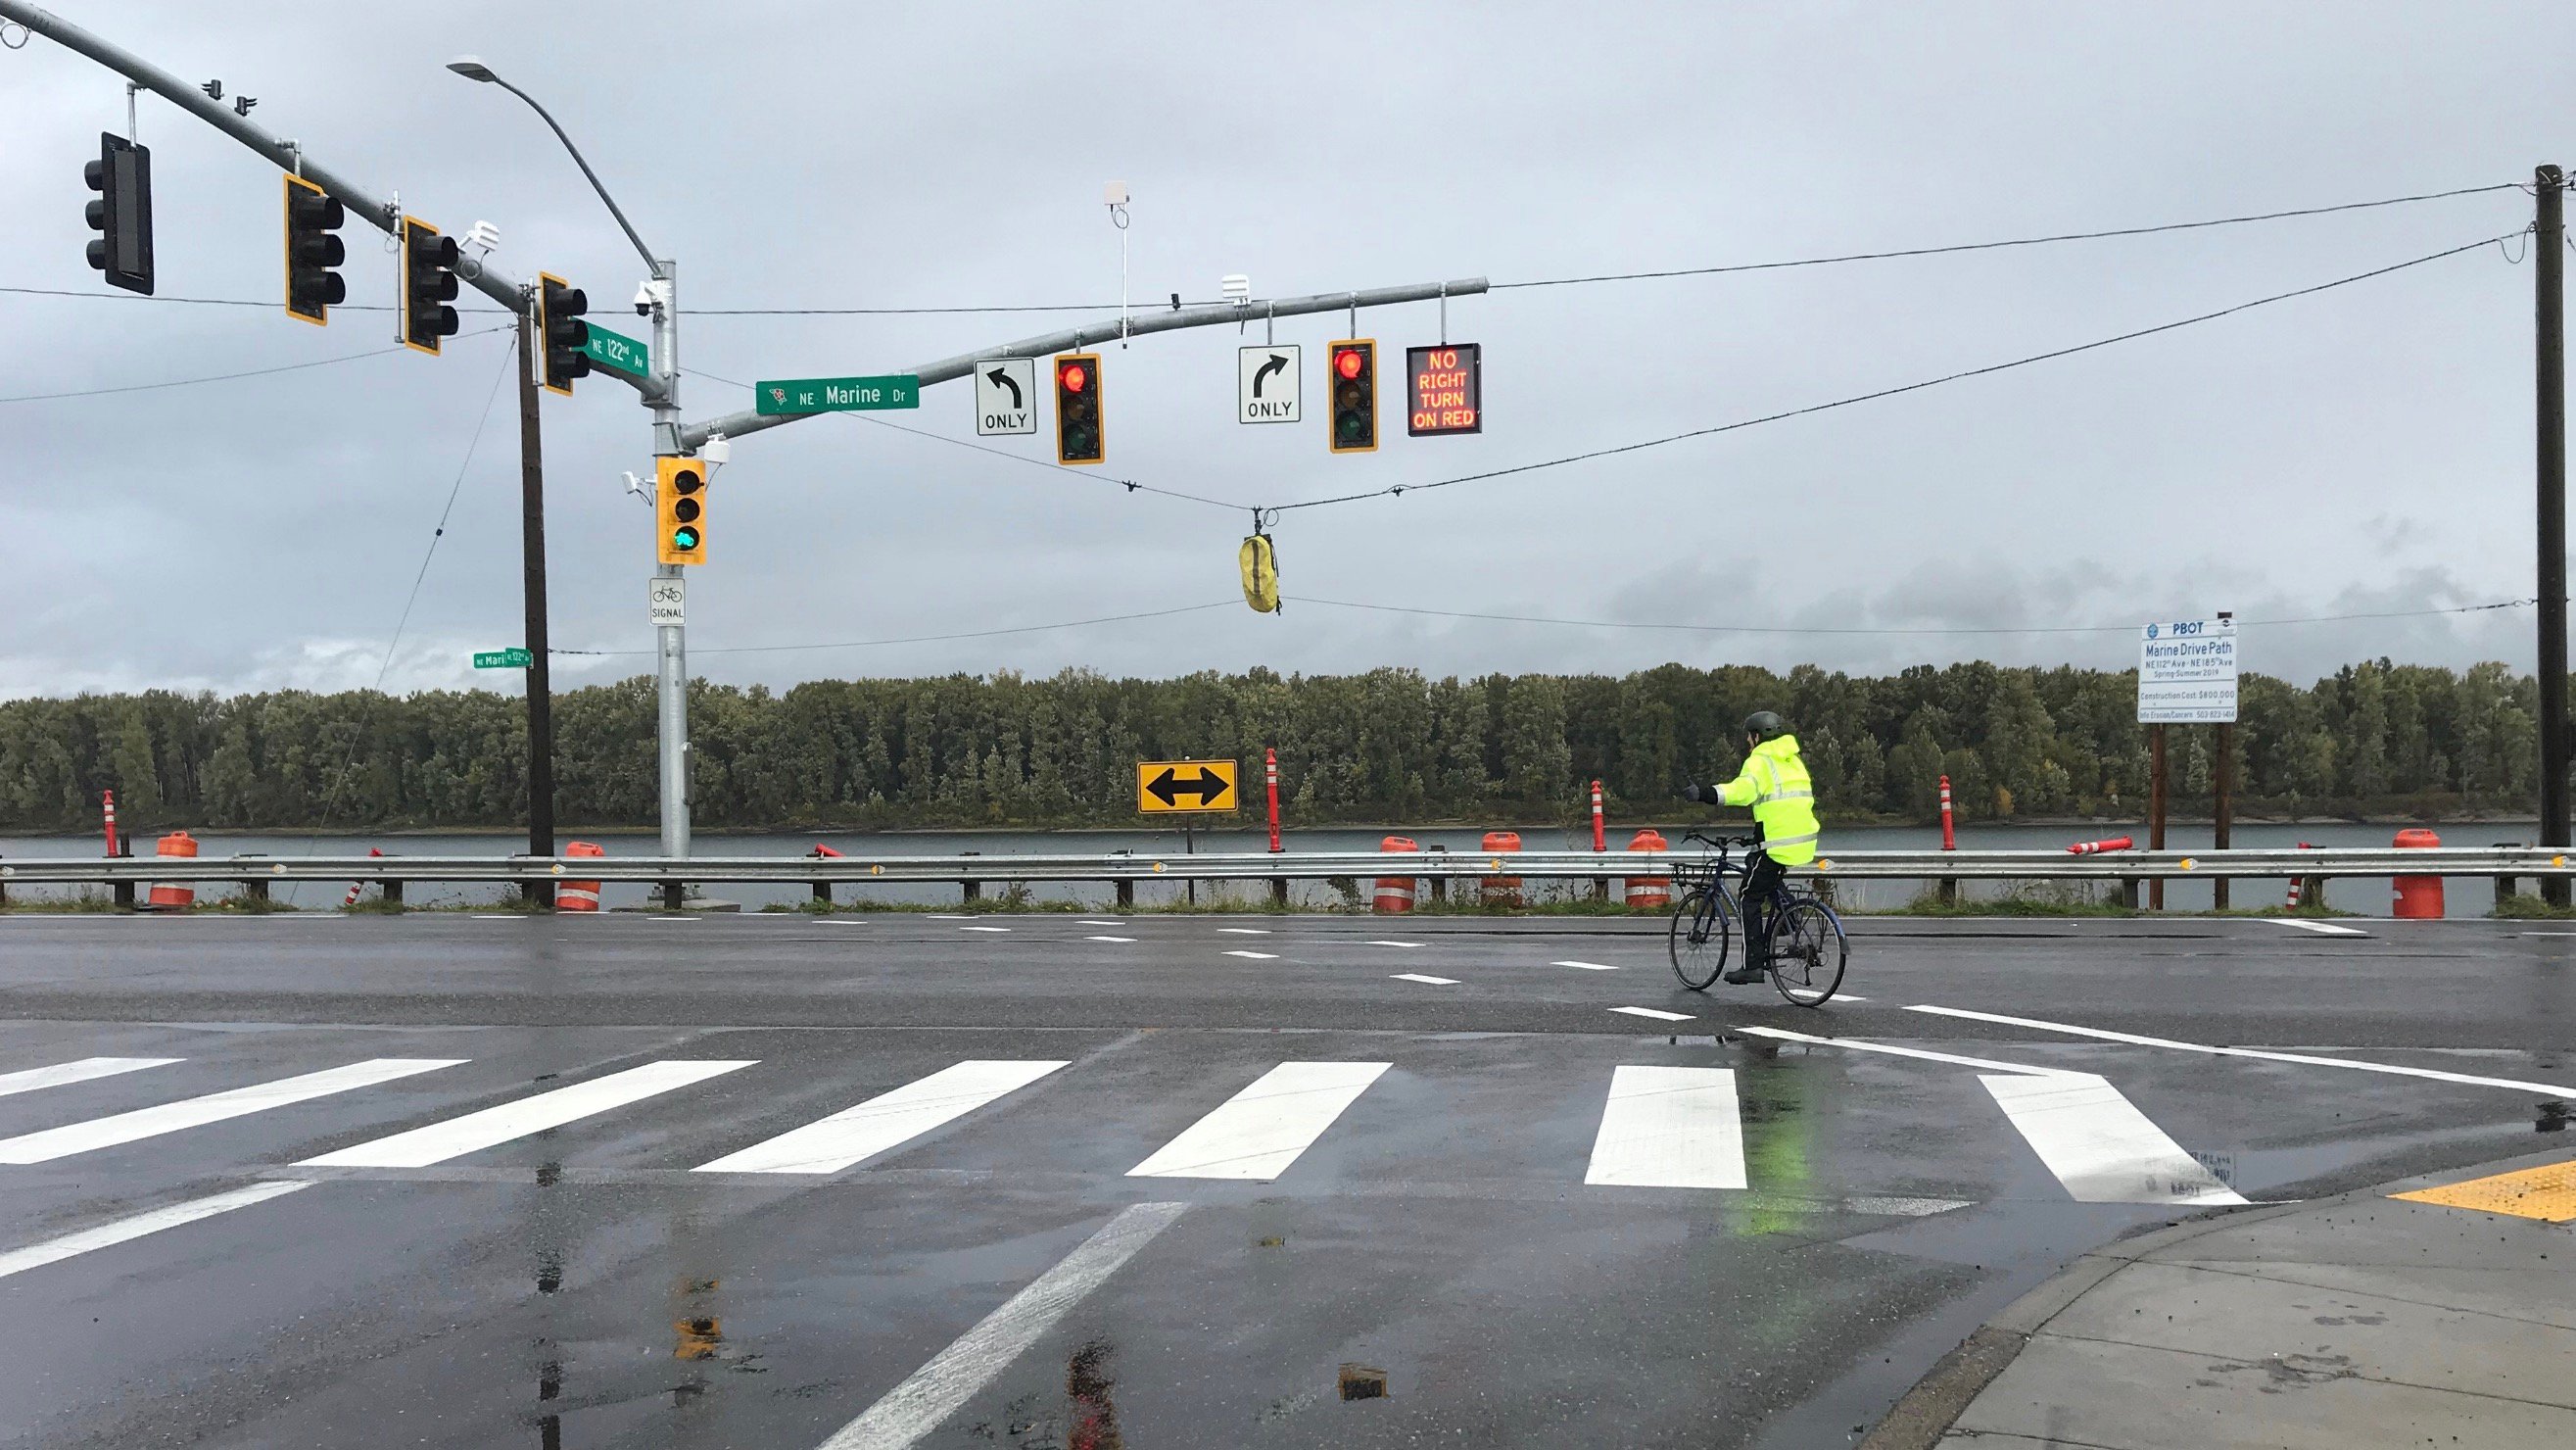 New Traffic Signal For Bikes Too Just Installed At Notorious Marine Drive Intersection Bikeportland Org